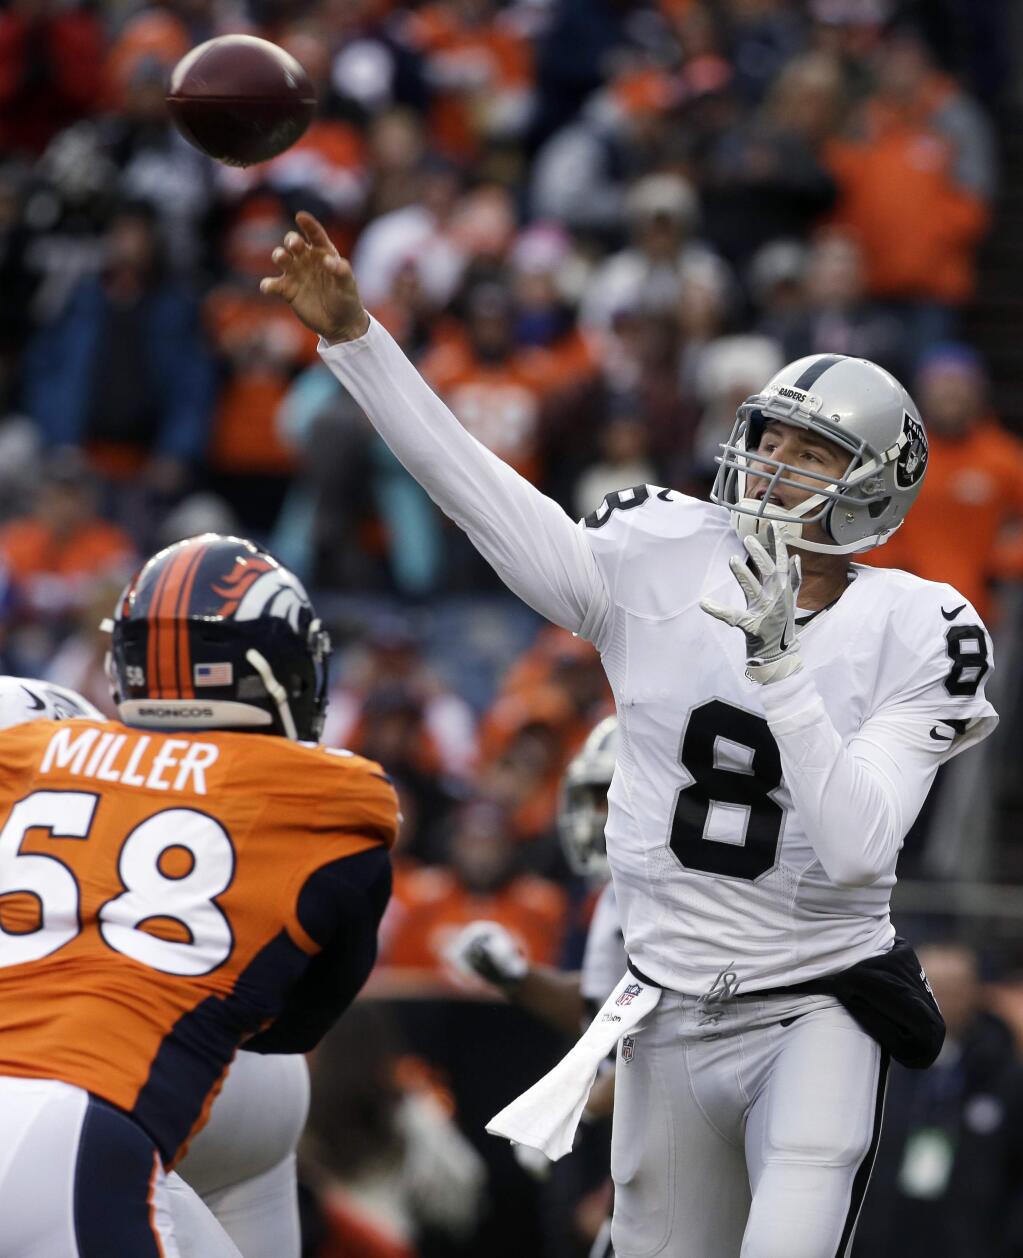 Oakland Raiders quarterback Connor Cook passes against the Denver Broncos during the first half unday, Jan. 1, 2017, in Denver. Cook came into the game after Raiders quarterback Matt McGloin was injured. (AP Photo/Joe Mahoney)